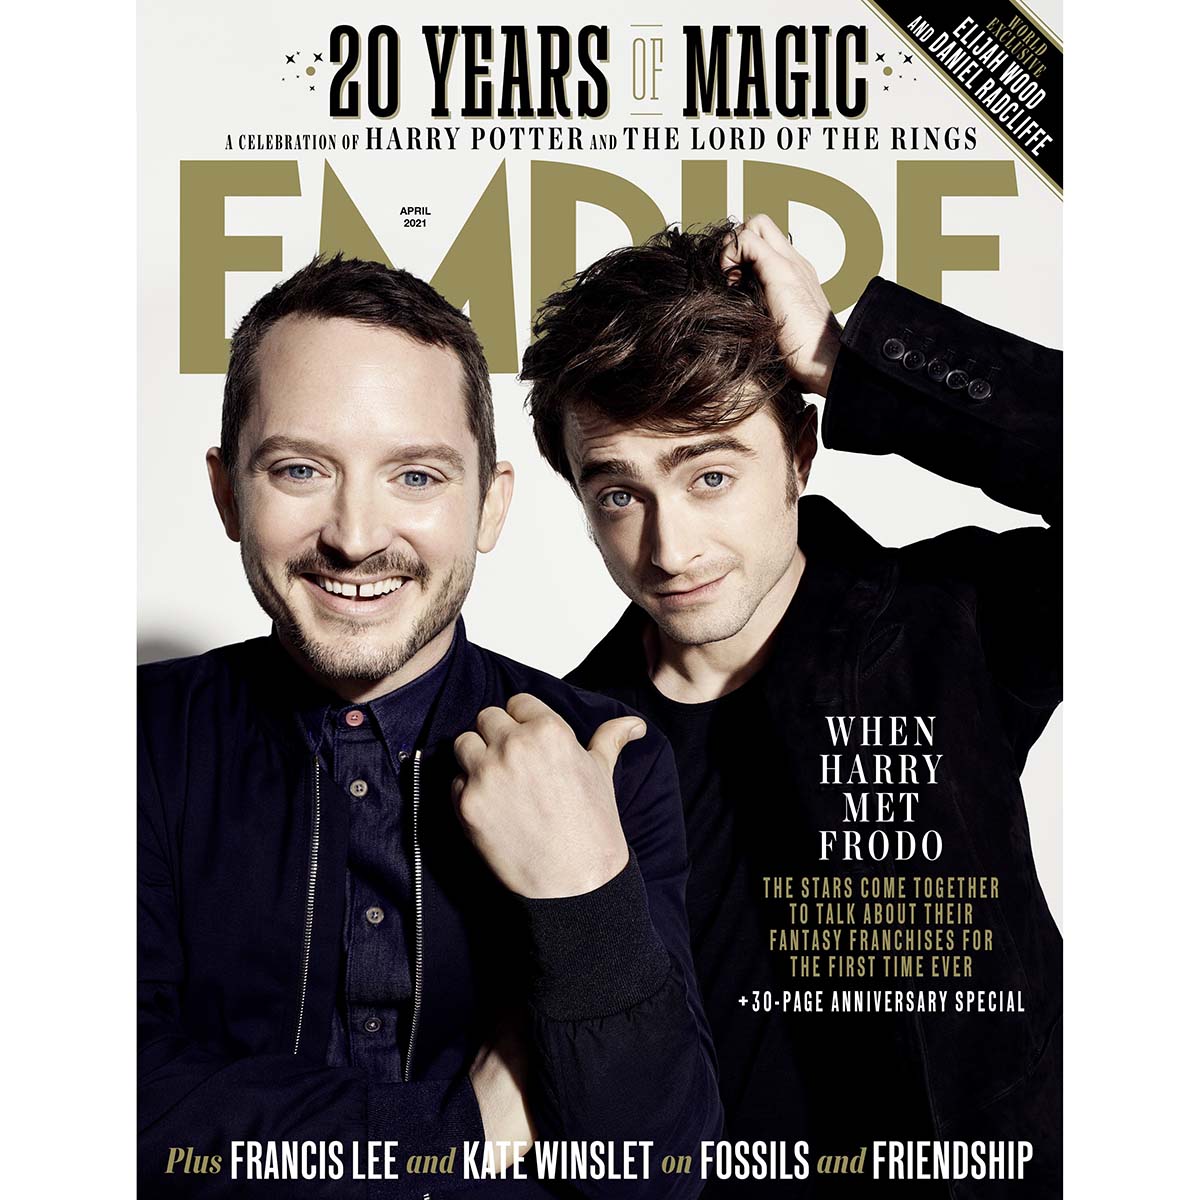 Empire Magazine Issue 386 (April 2021)  20 Years of Magic - A Celebration of Harry Potter and The Lord of the Rings